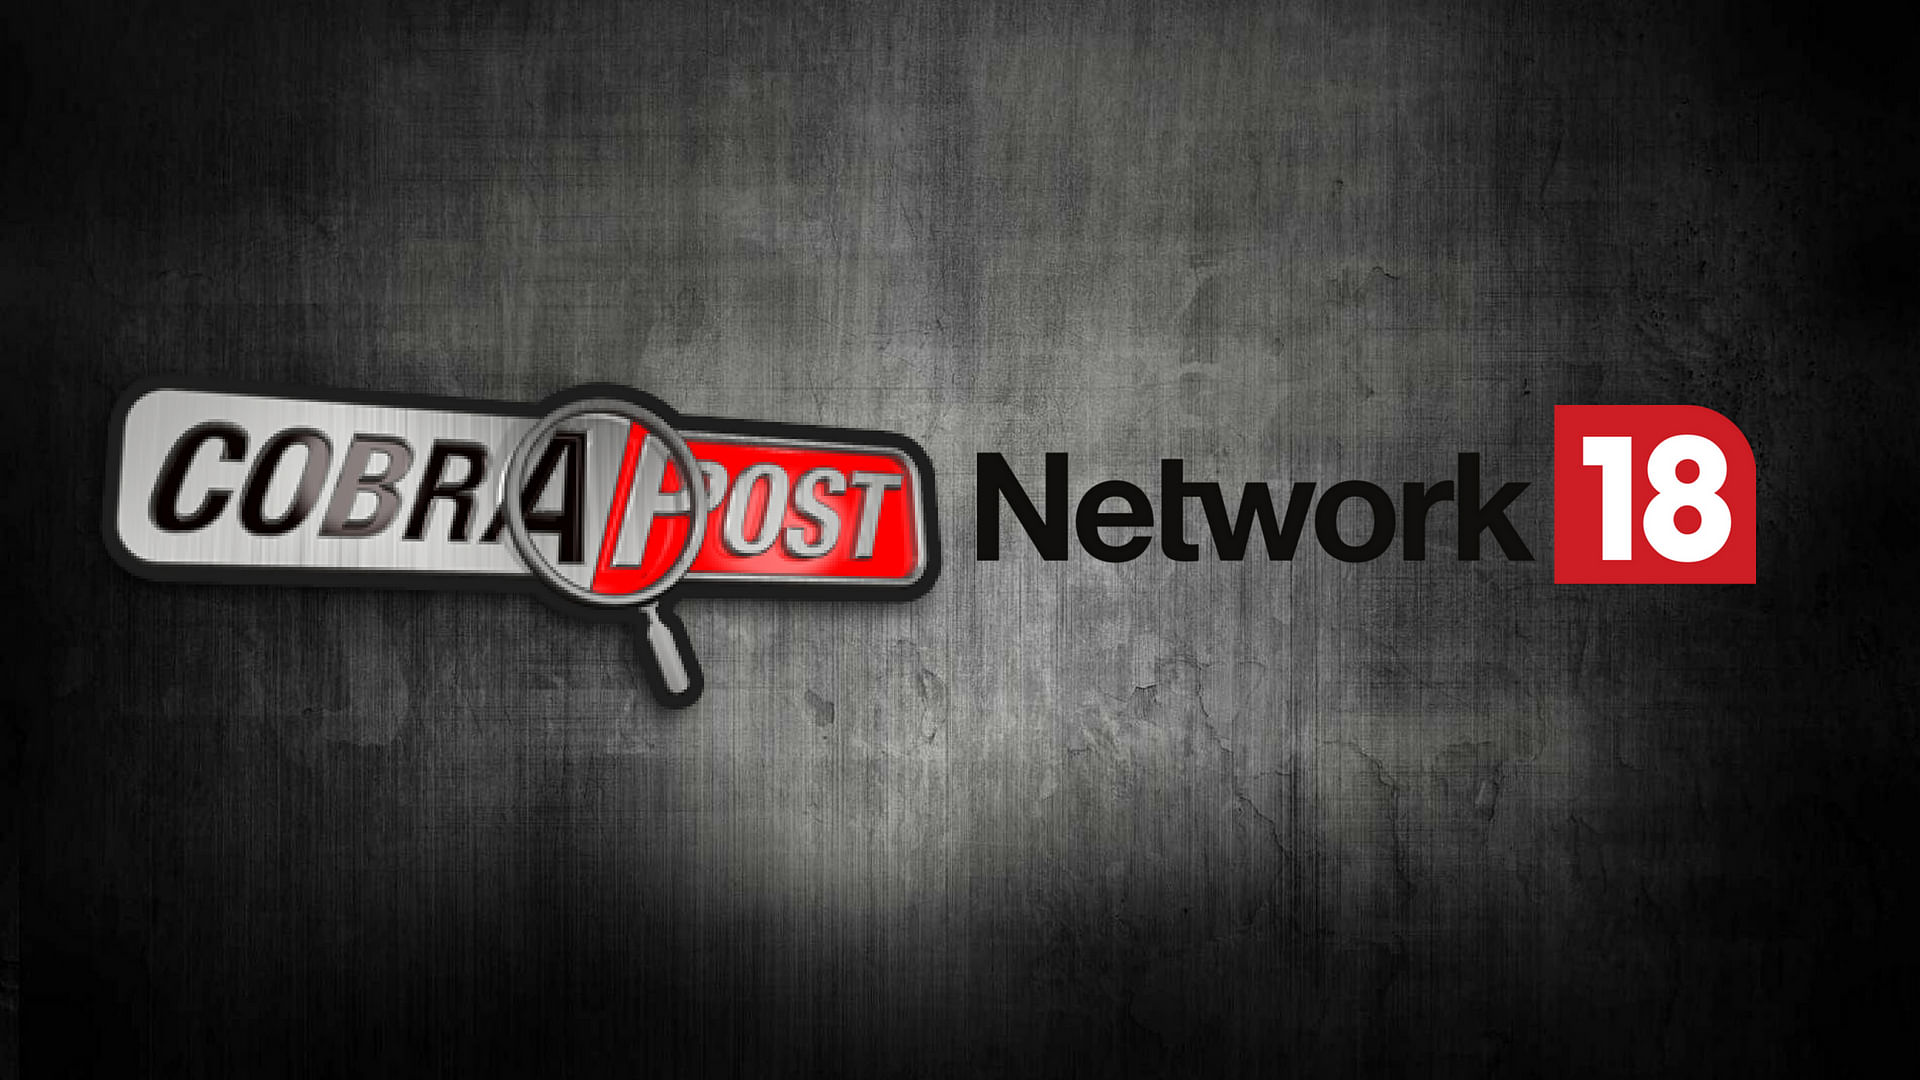 In a sting operation on Network 18, news agency <i>Cobrapost</i> has alleged that the organisation agreed to air propagandist news.